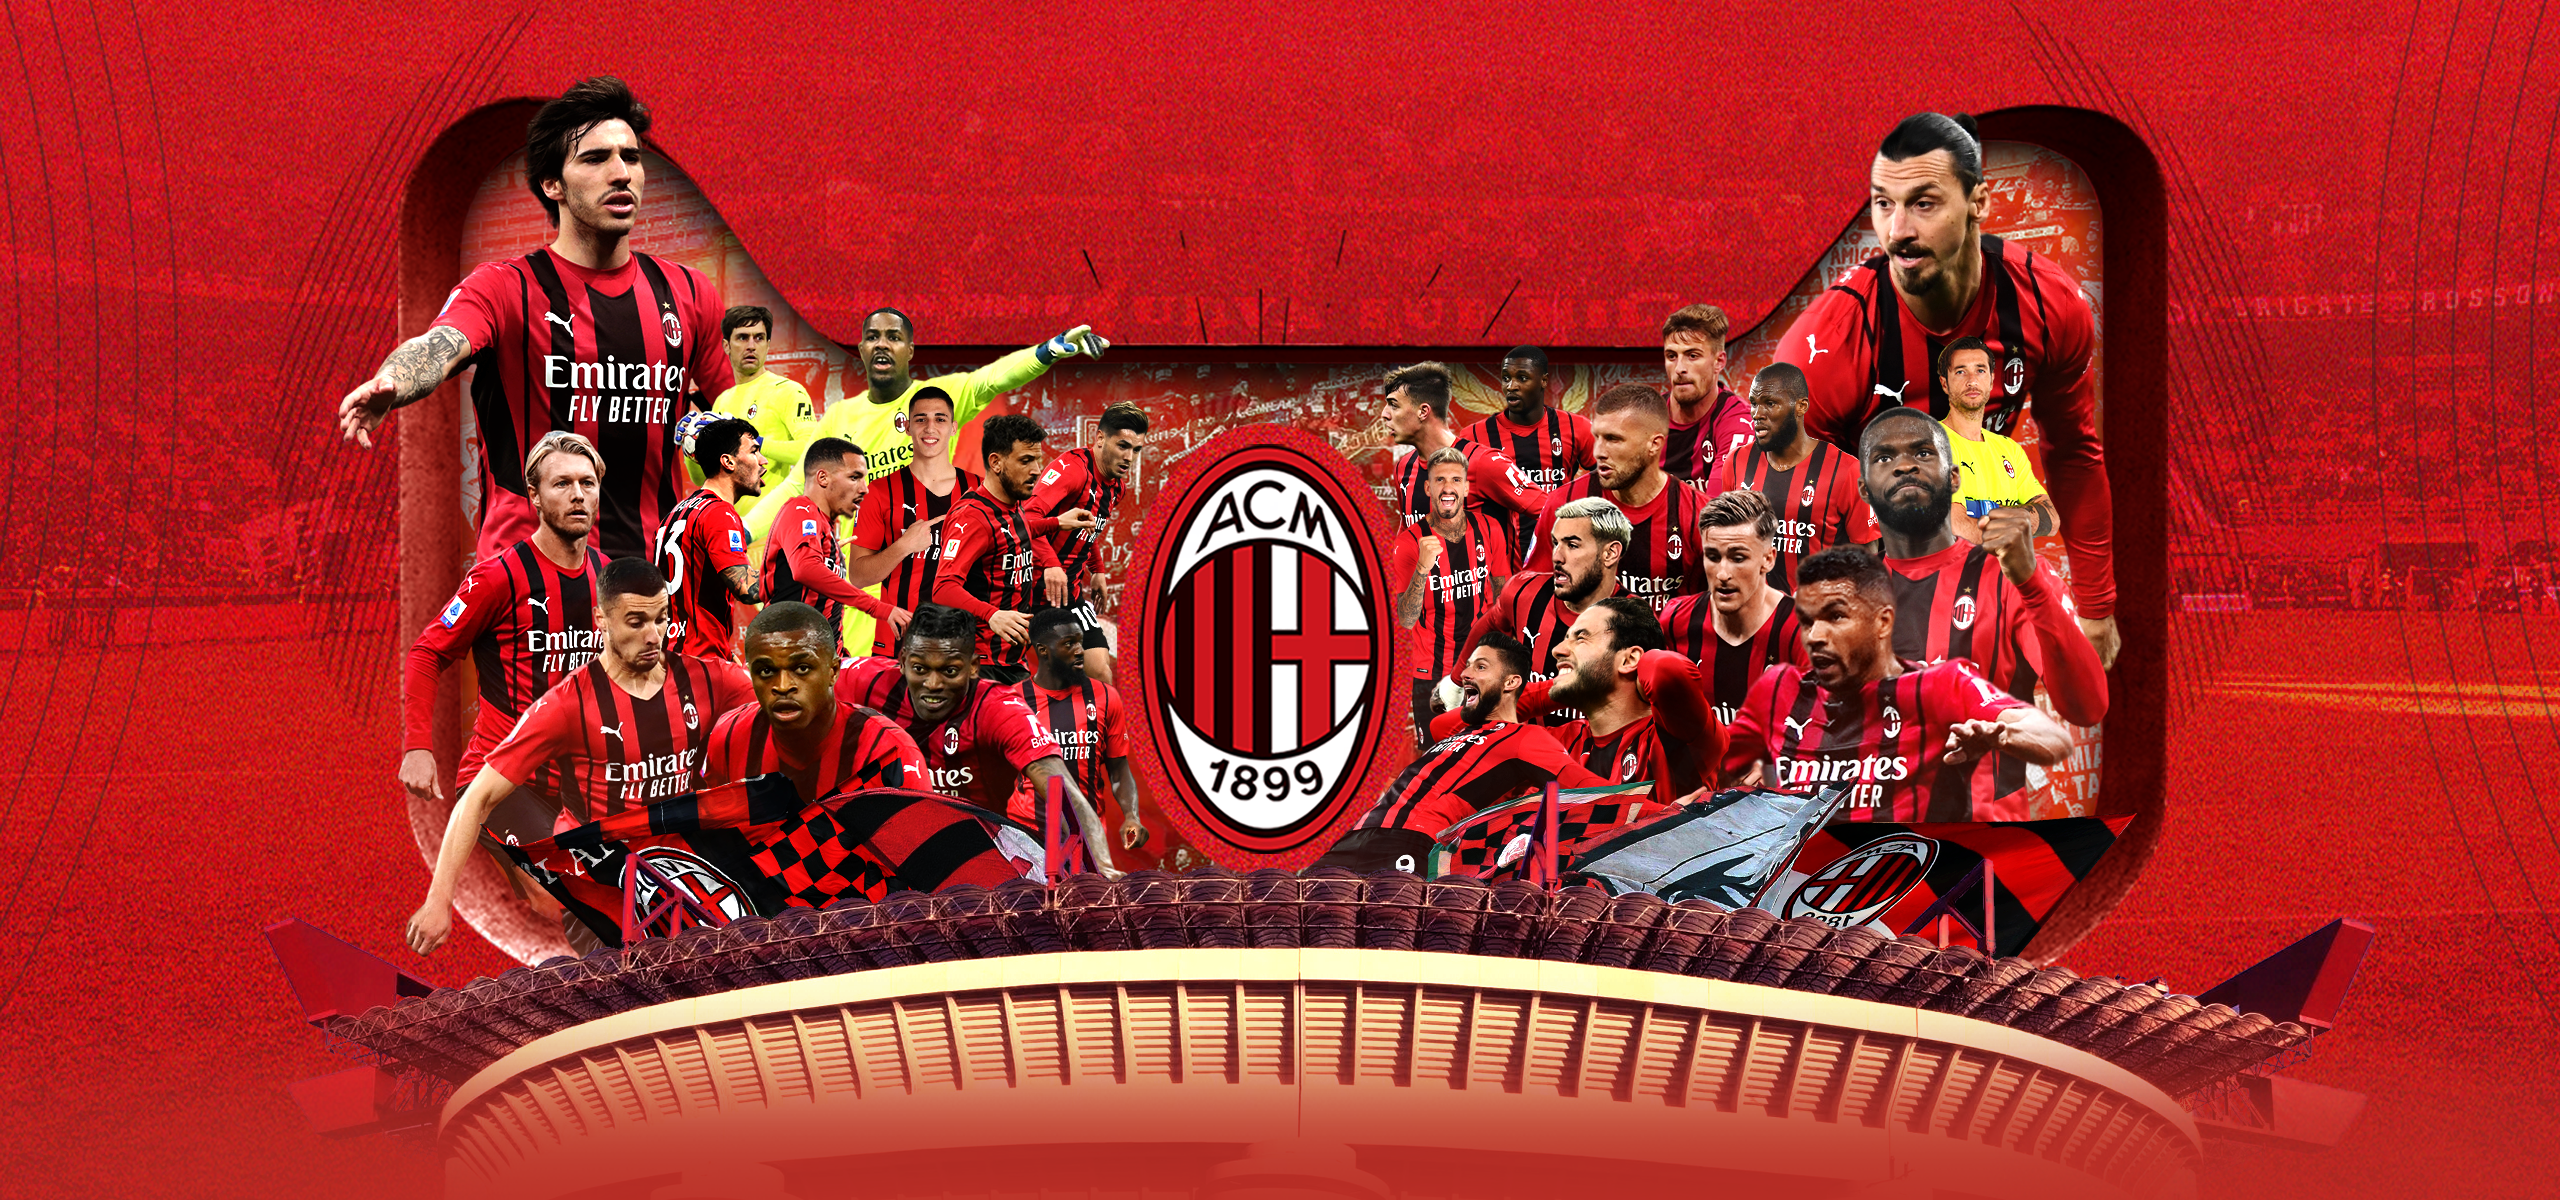 AC Milan launches an official flagship store on Tmall